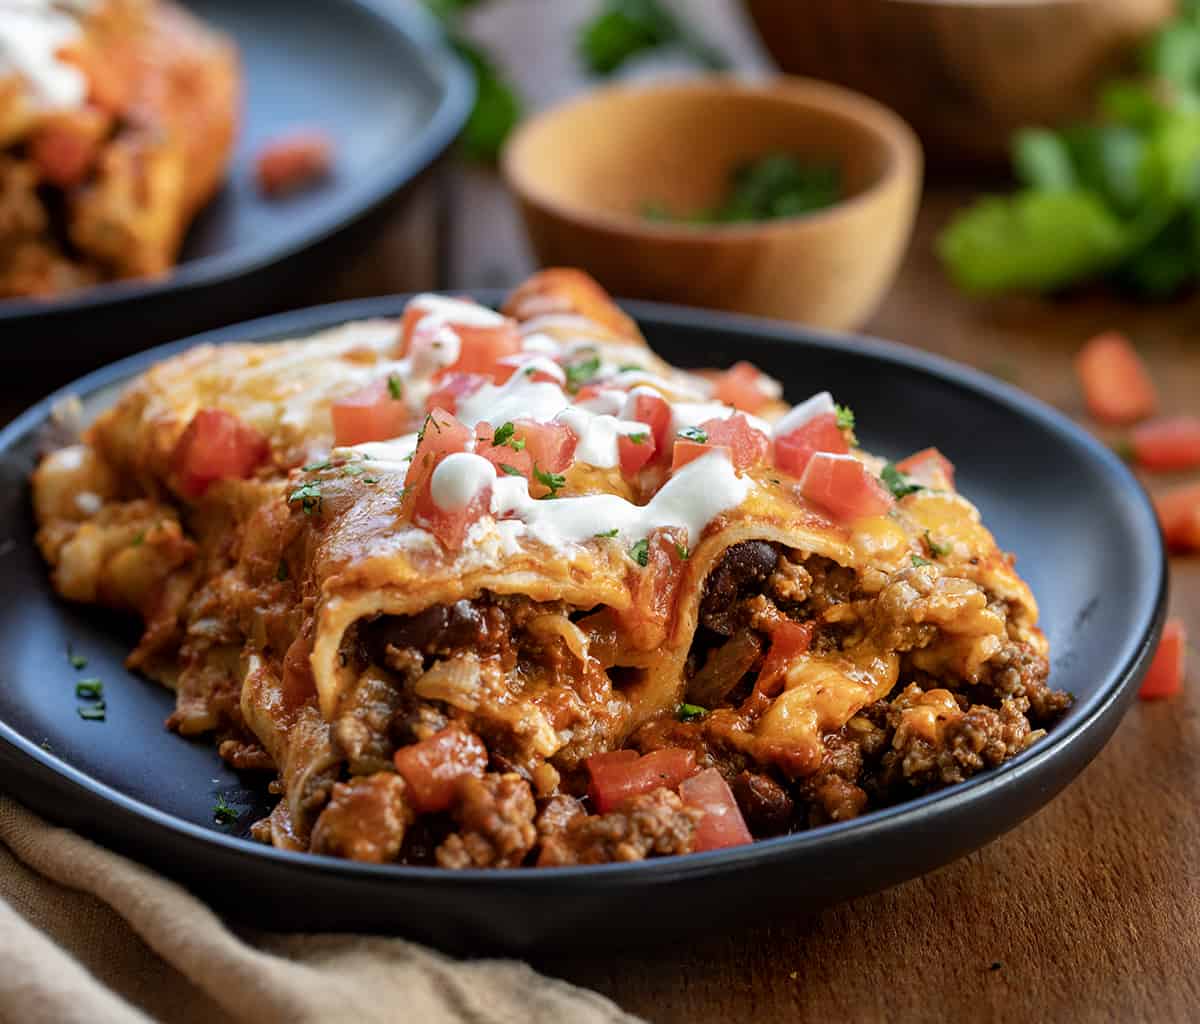 Two Beef Enchiladas on a plate showing the filling inside.